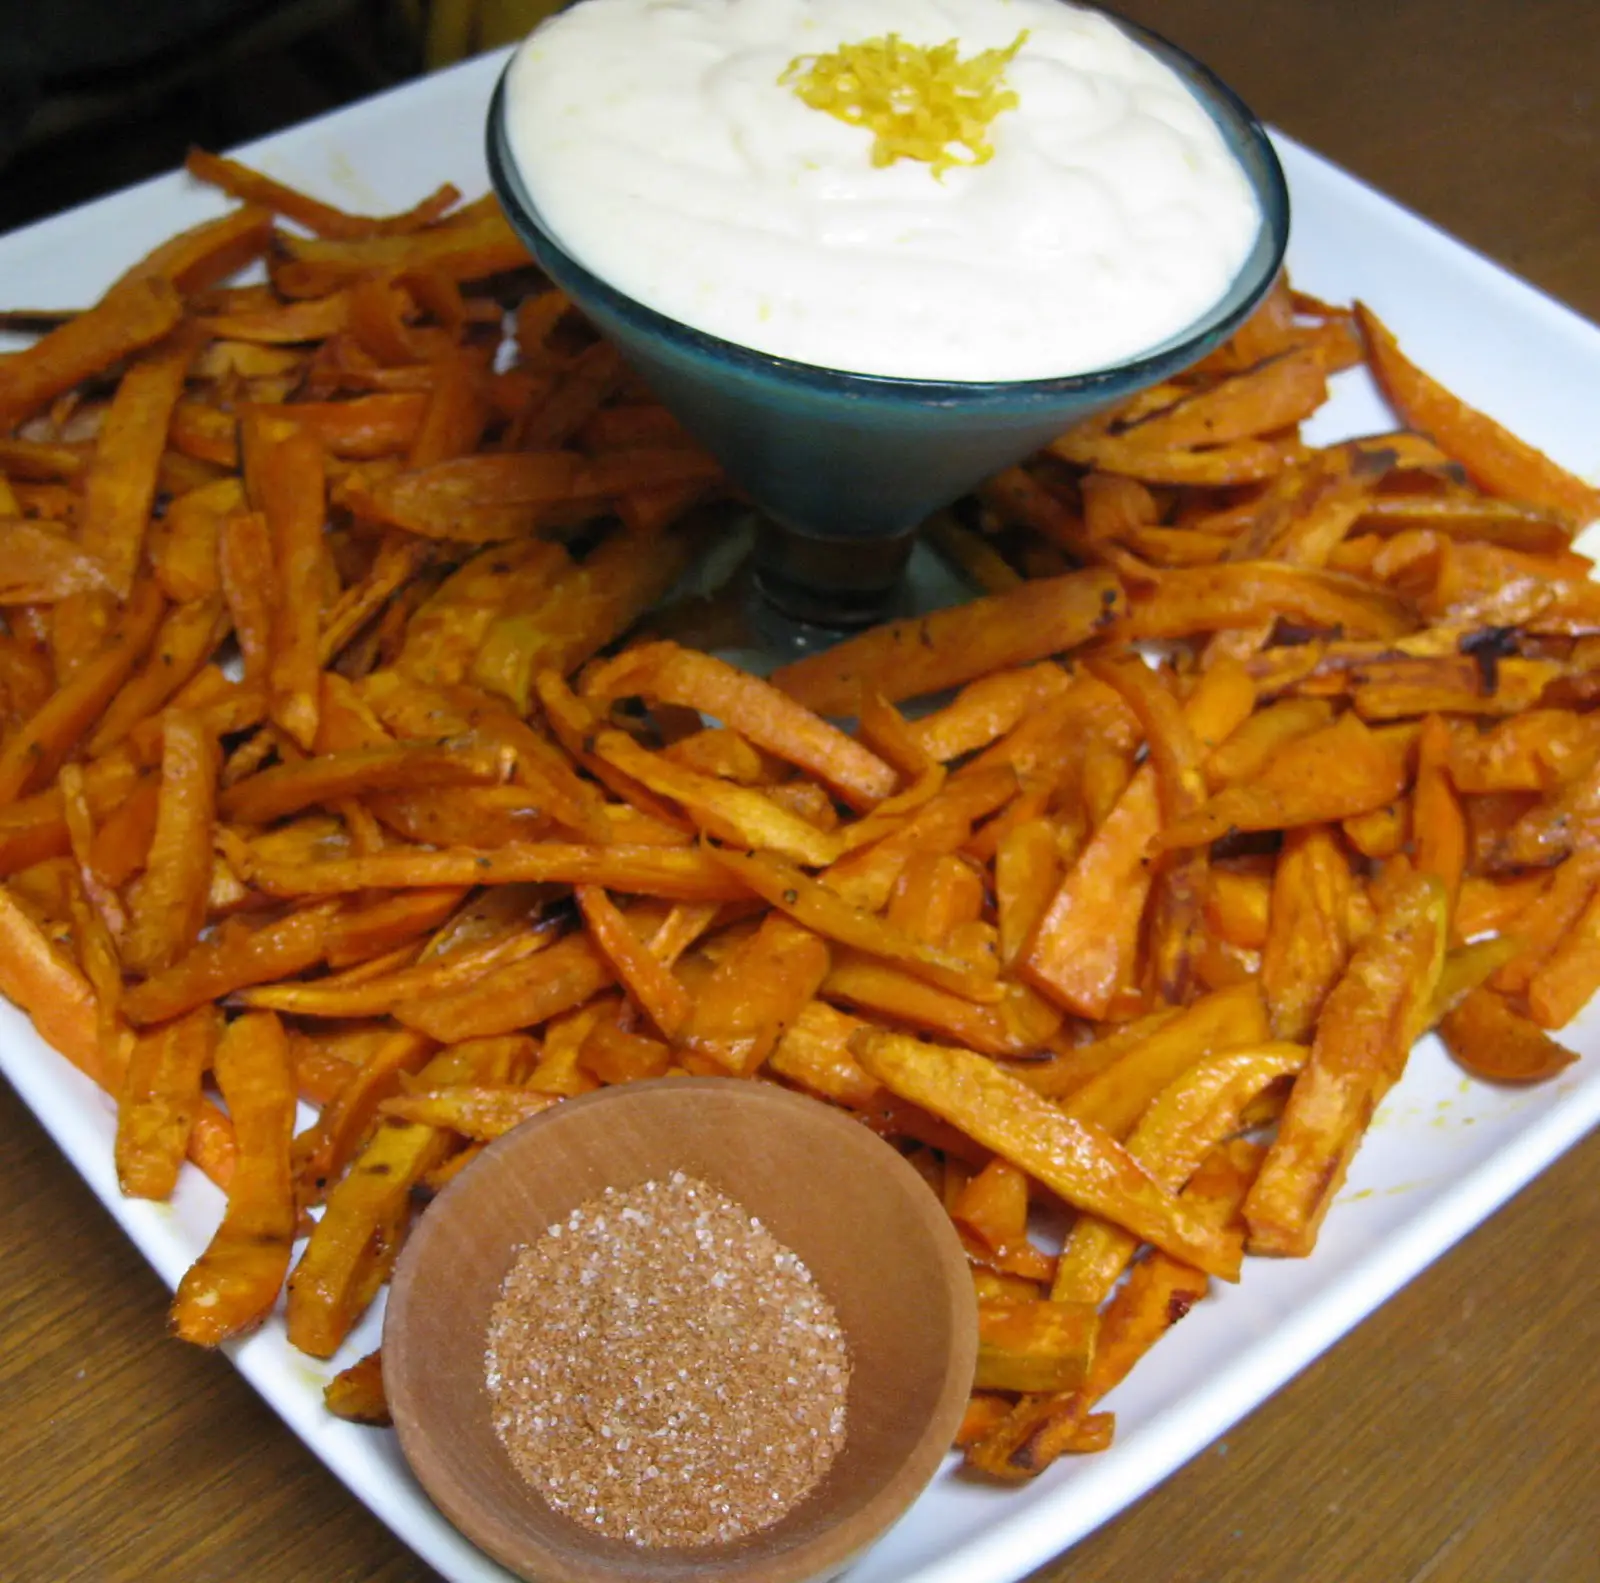 Flavors of the Sun: Baked Sweet Potato Fries with Lime